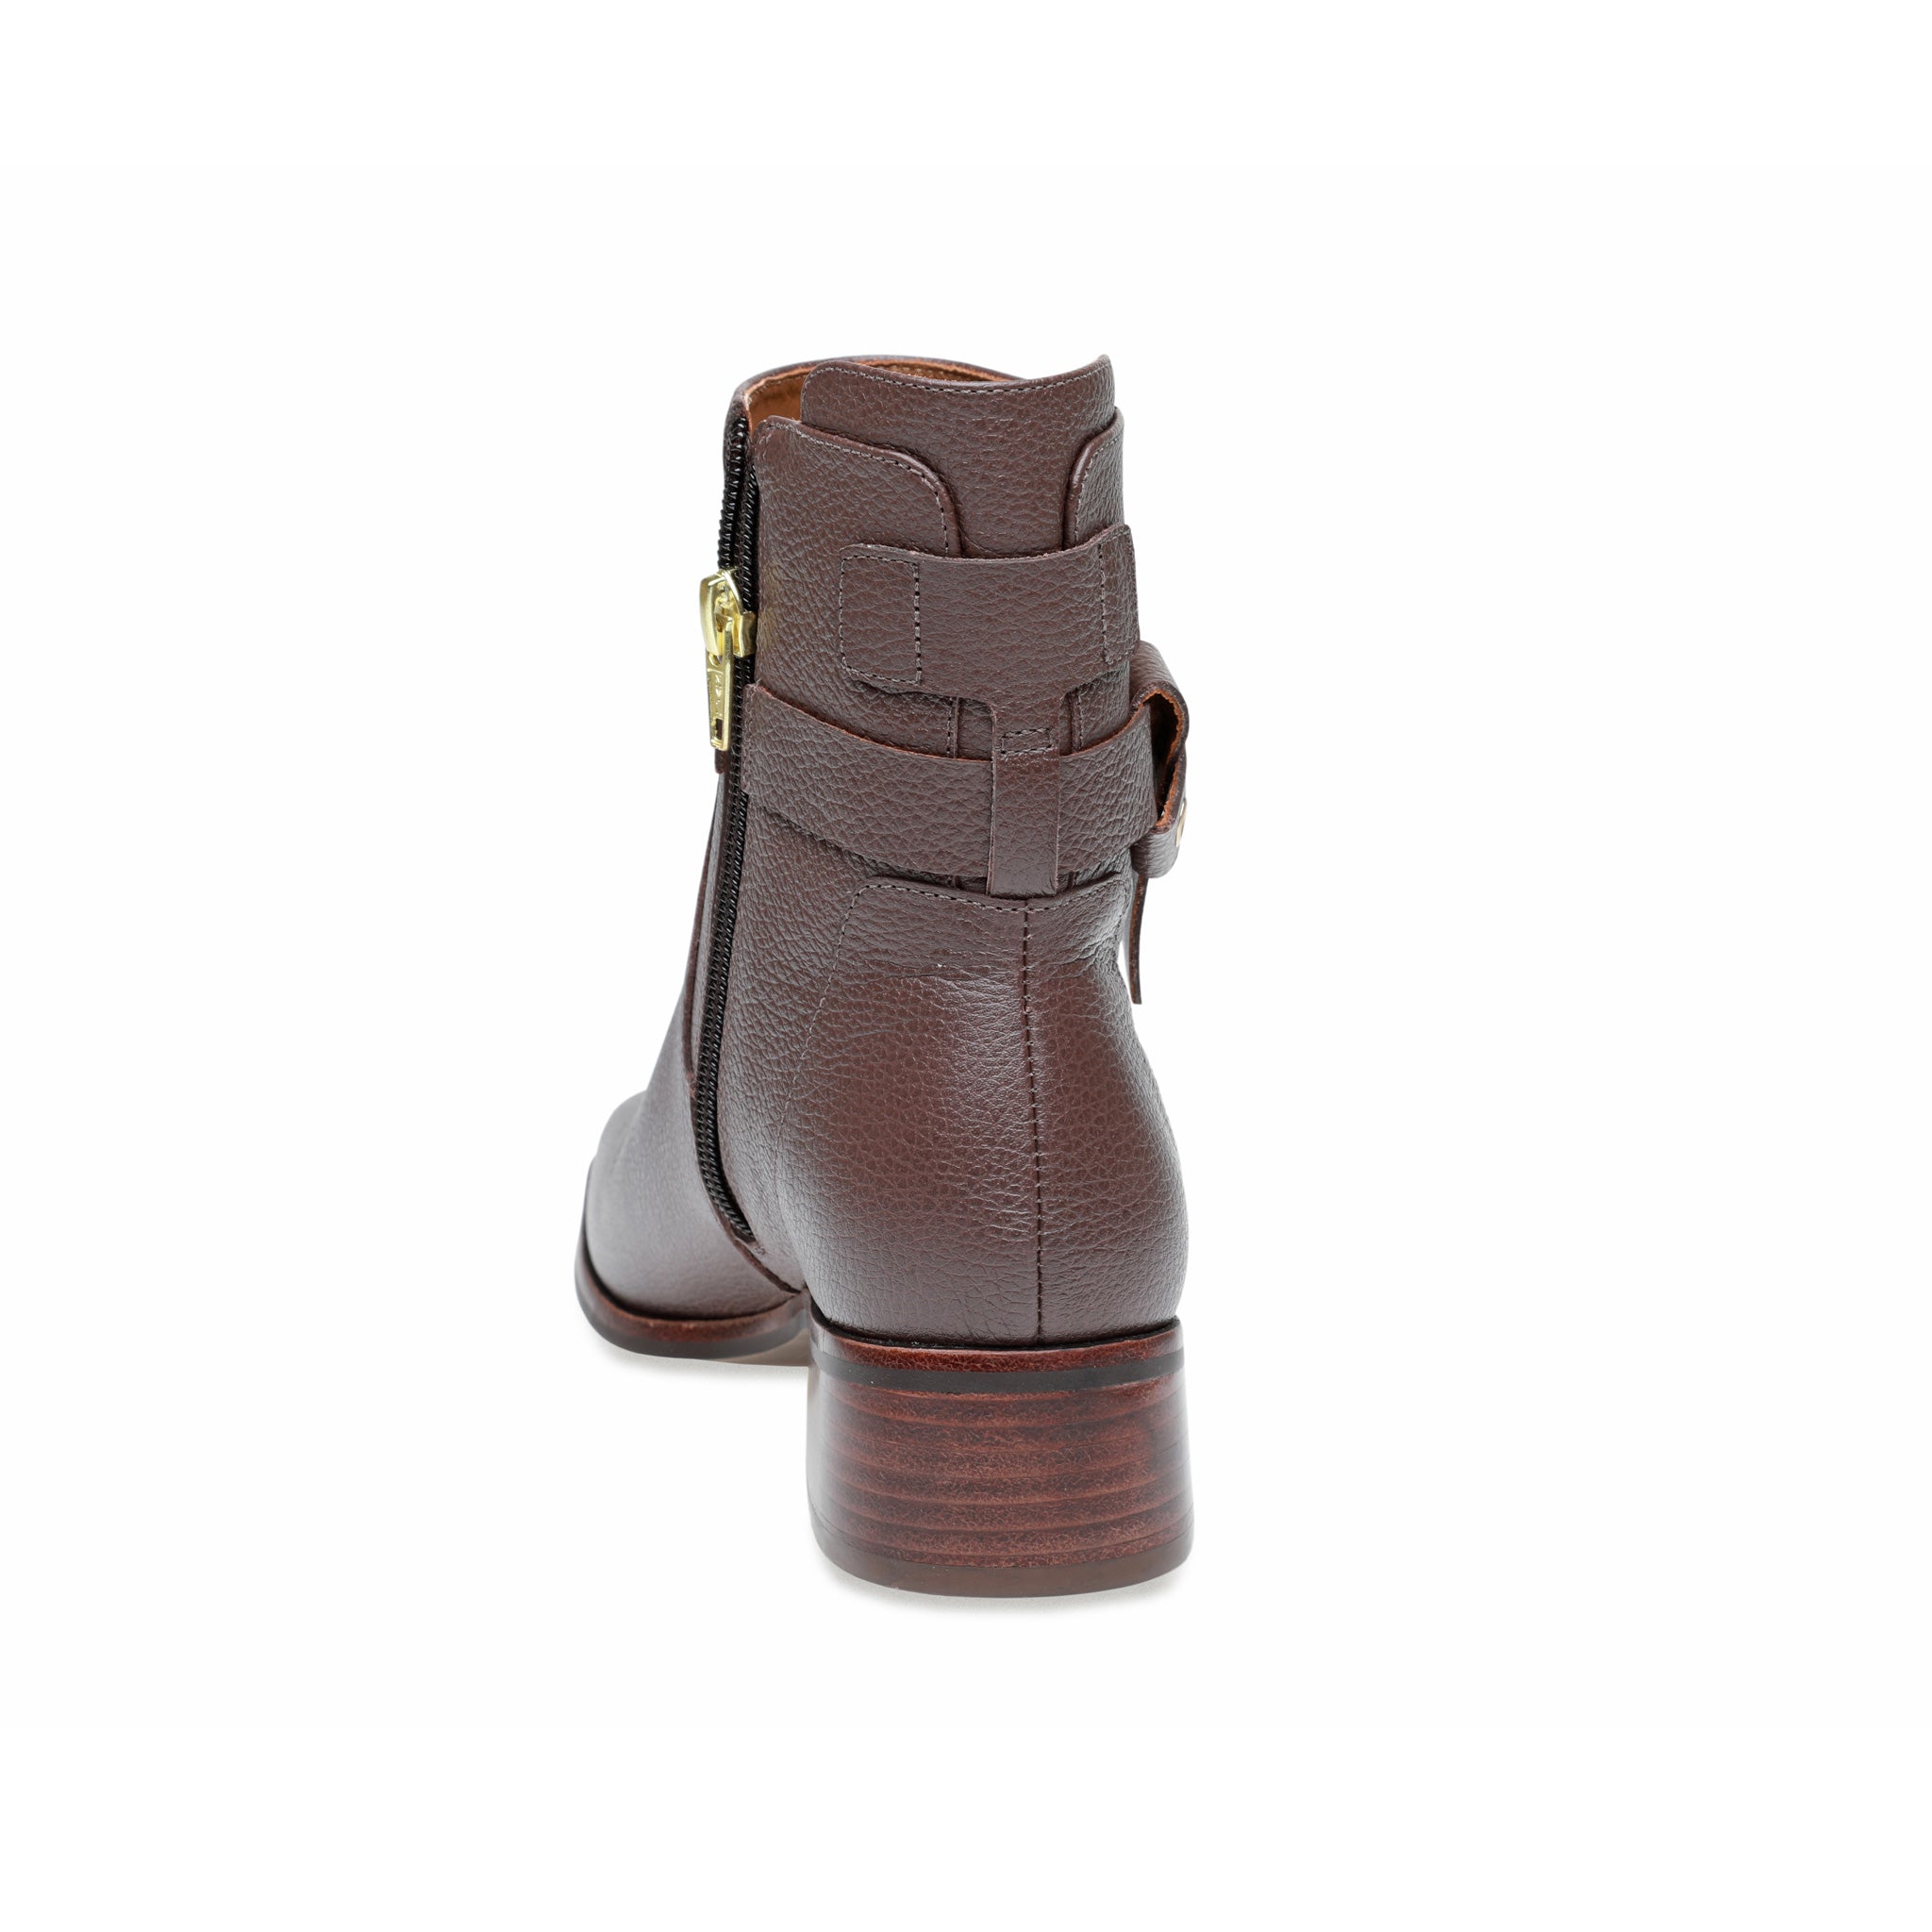 Abigail Buckle Boot - Brown